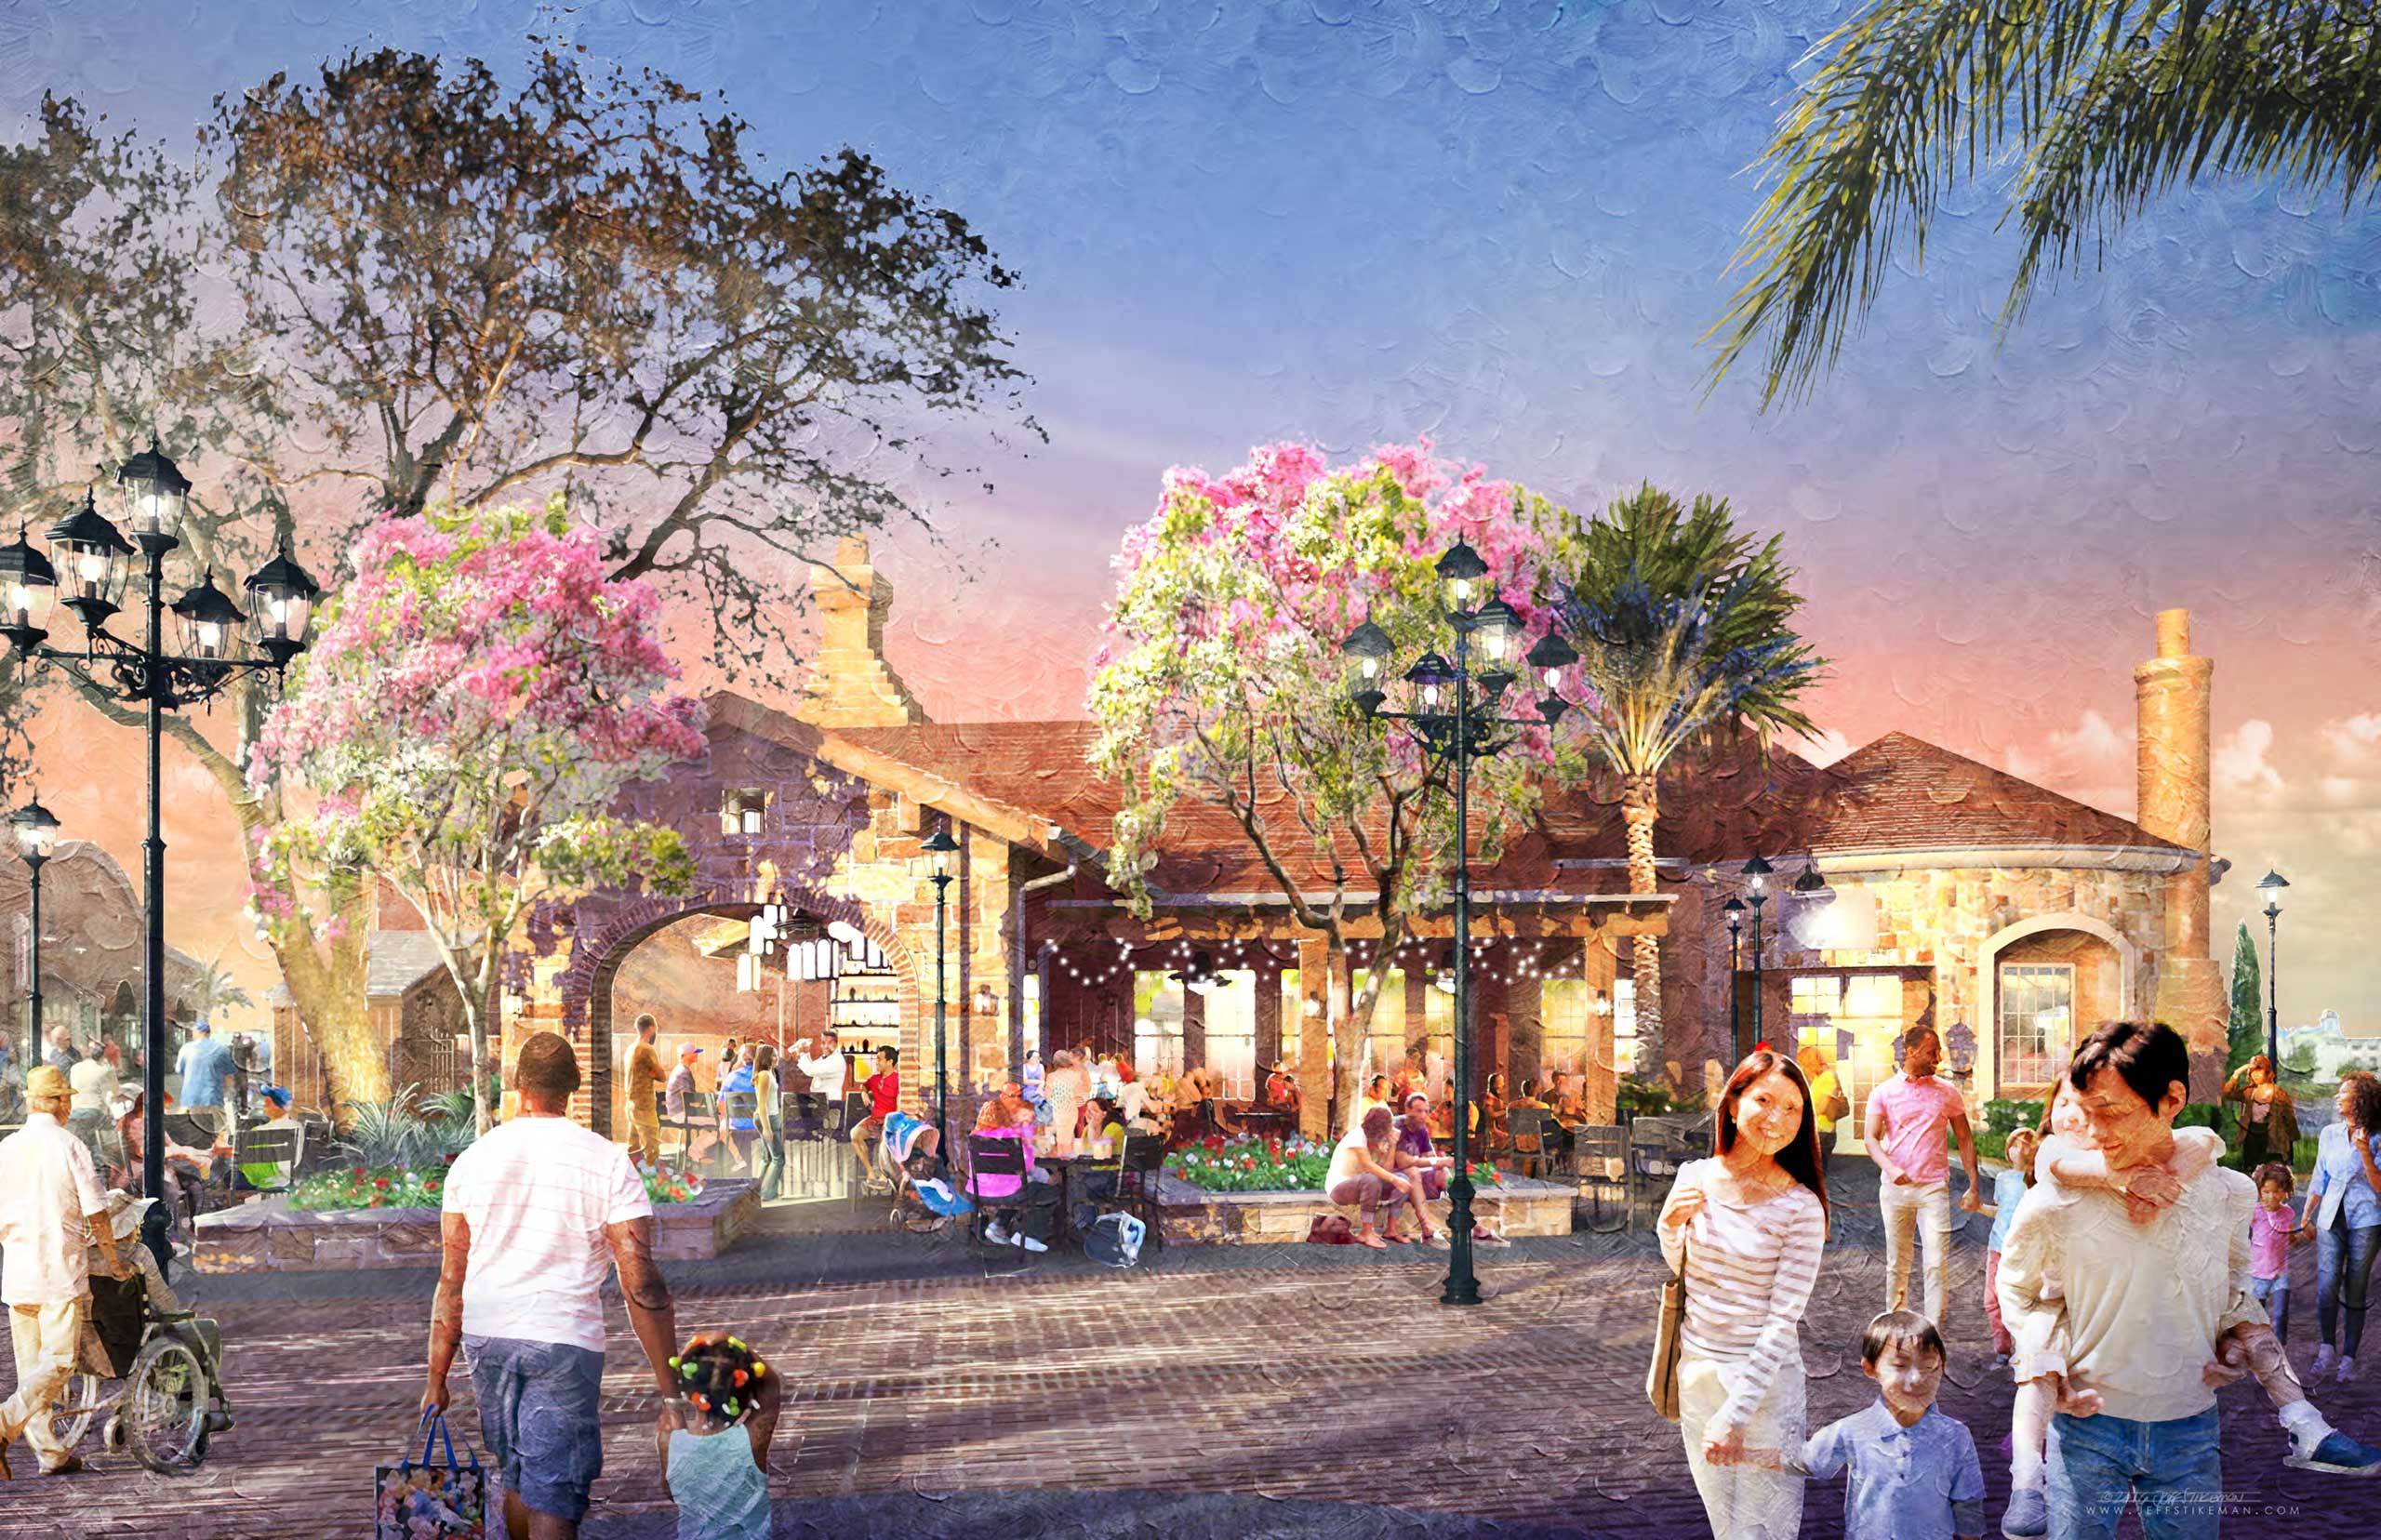 PHOTO - First look at the new Italian Restaurant concept to replace Portobello at Disney Springs 